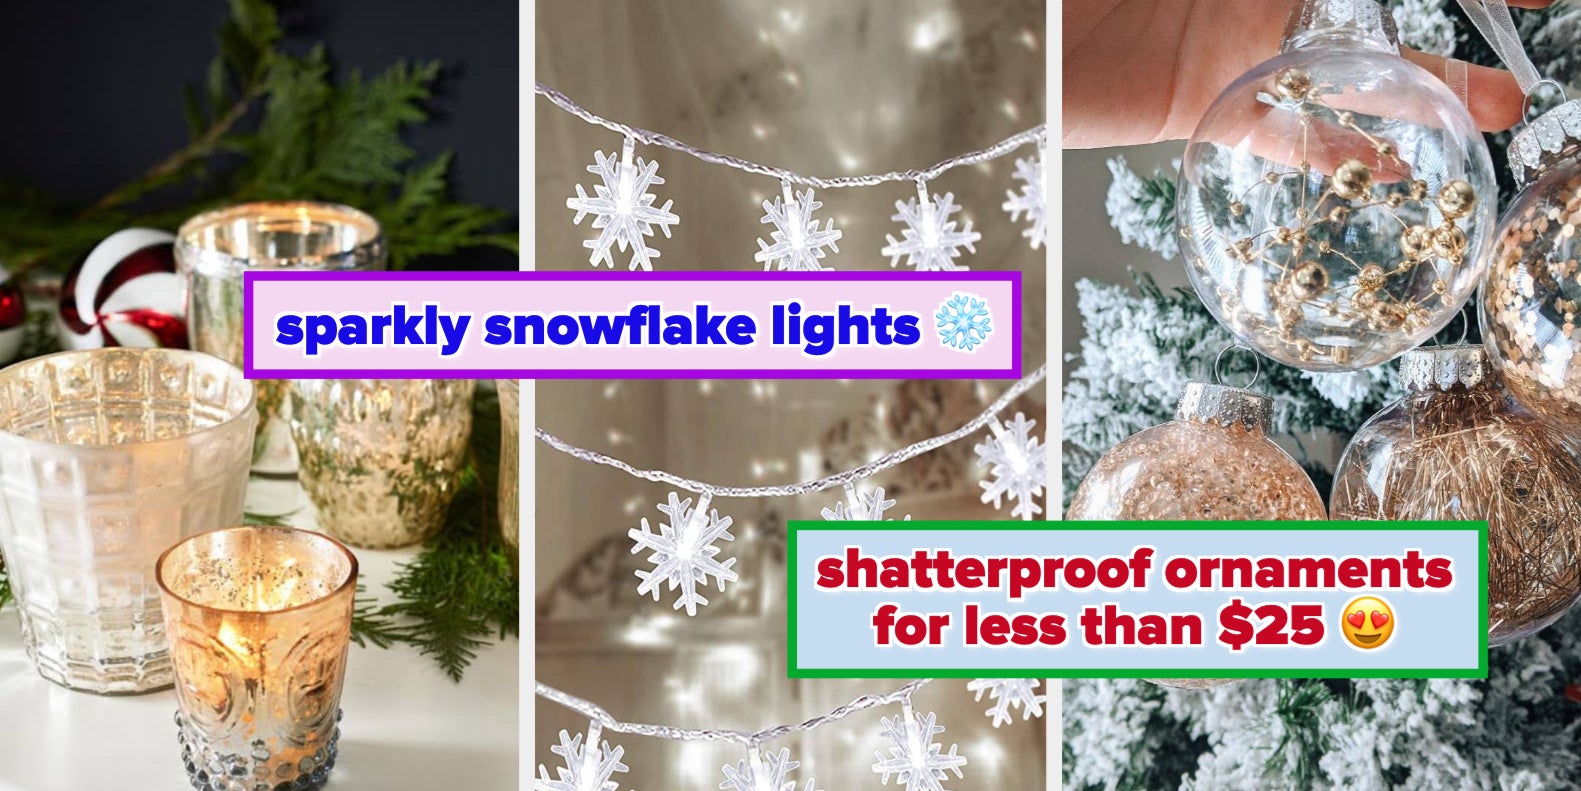 Snowflake Hanging Decorations to Turn Your Home Into a Winter Wonderland -  Make Life Lovely